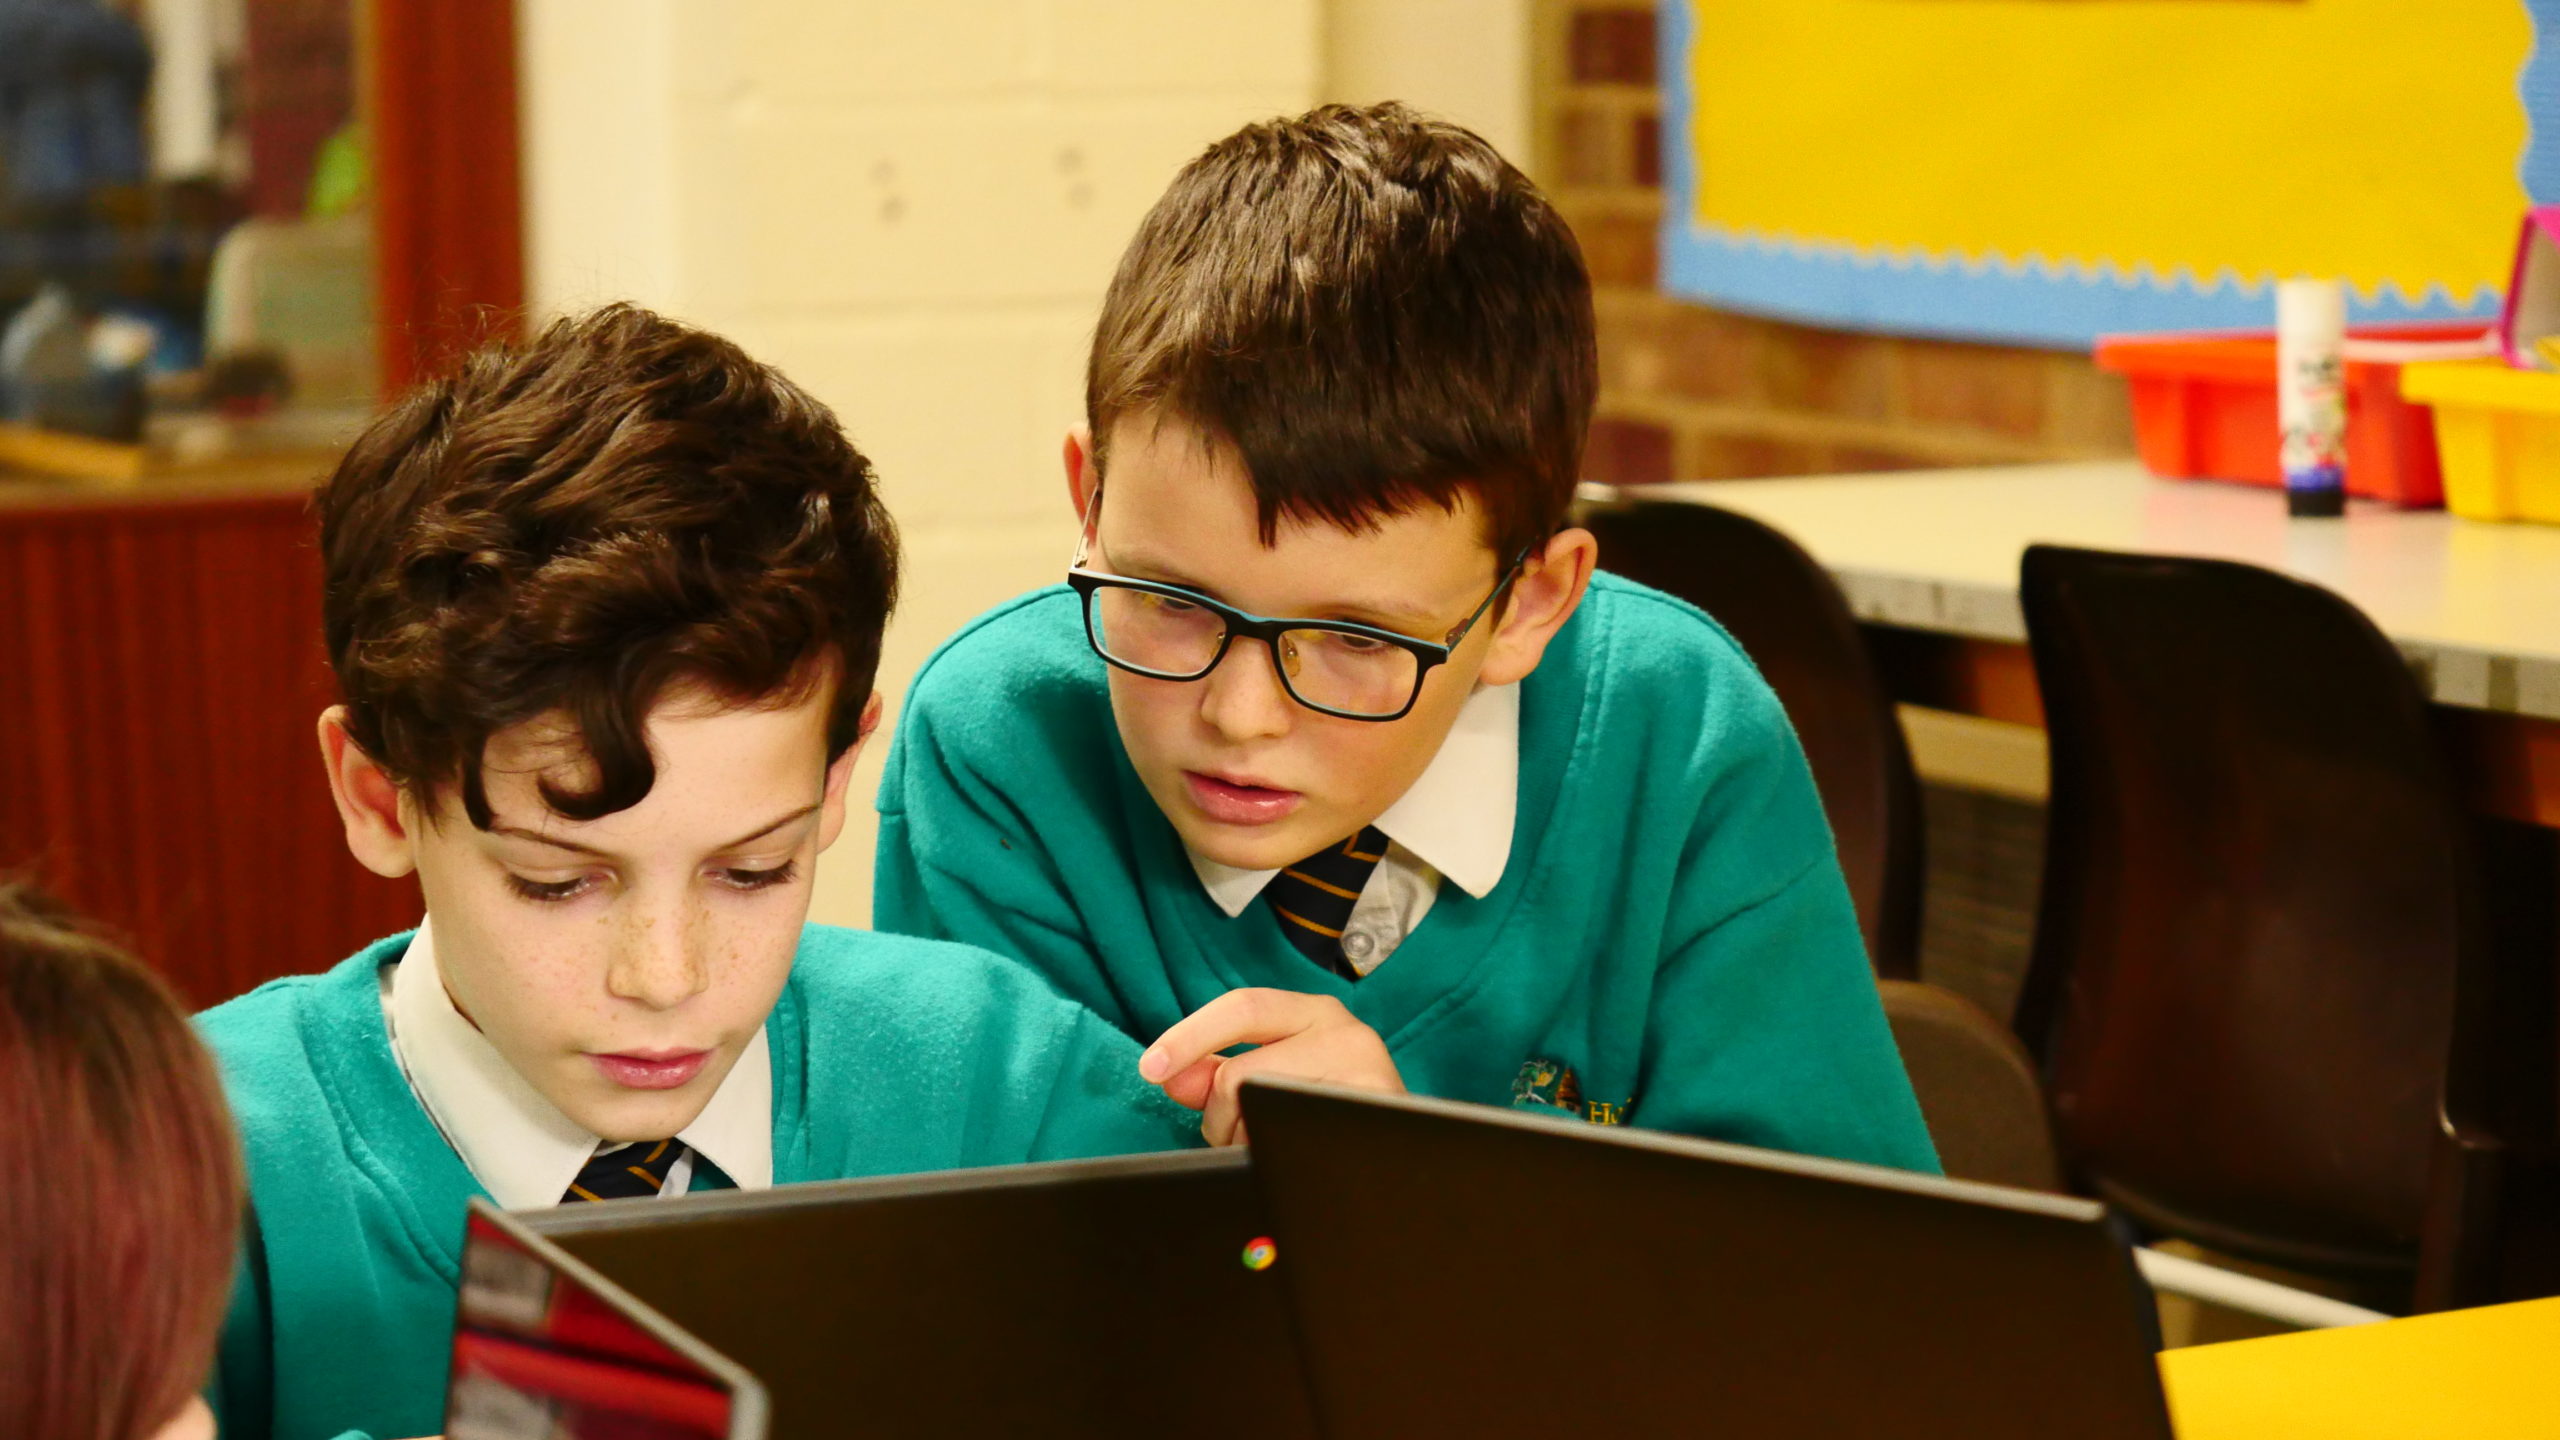 Two boys looking at a computer screen in a classroom.